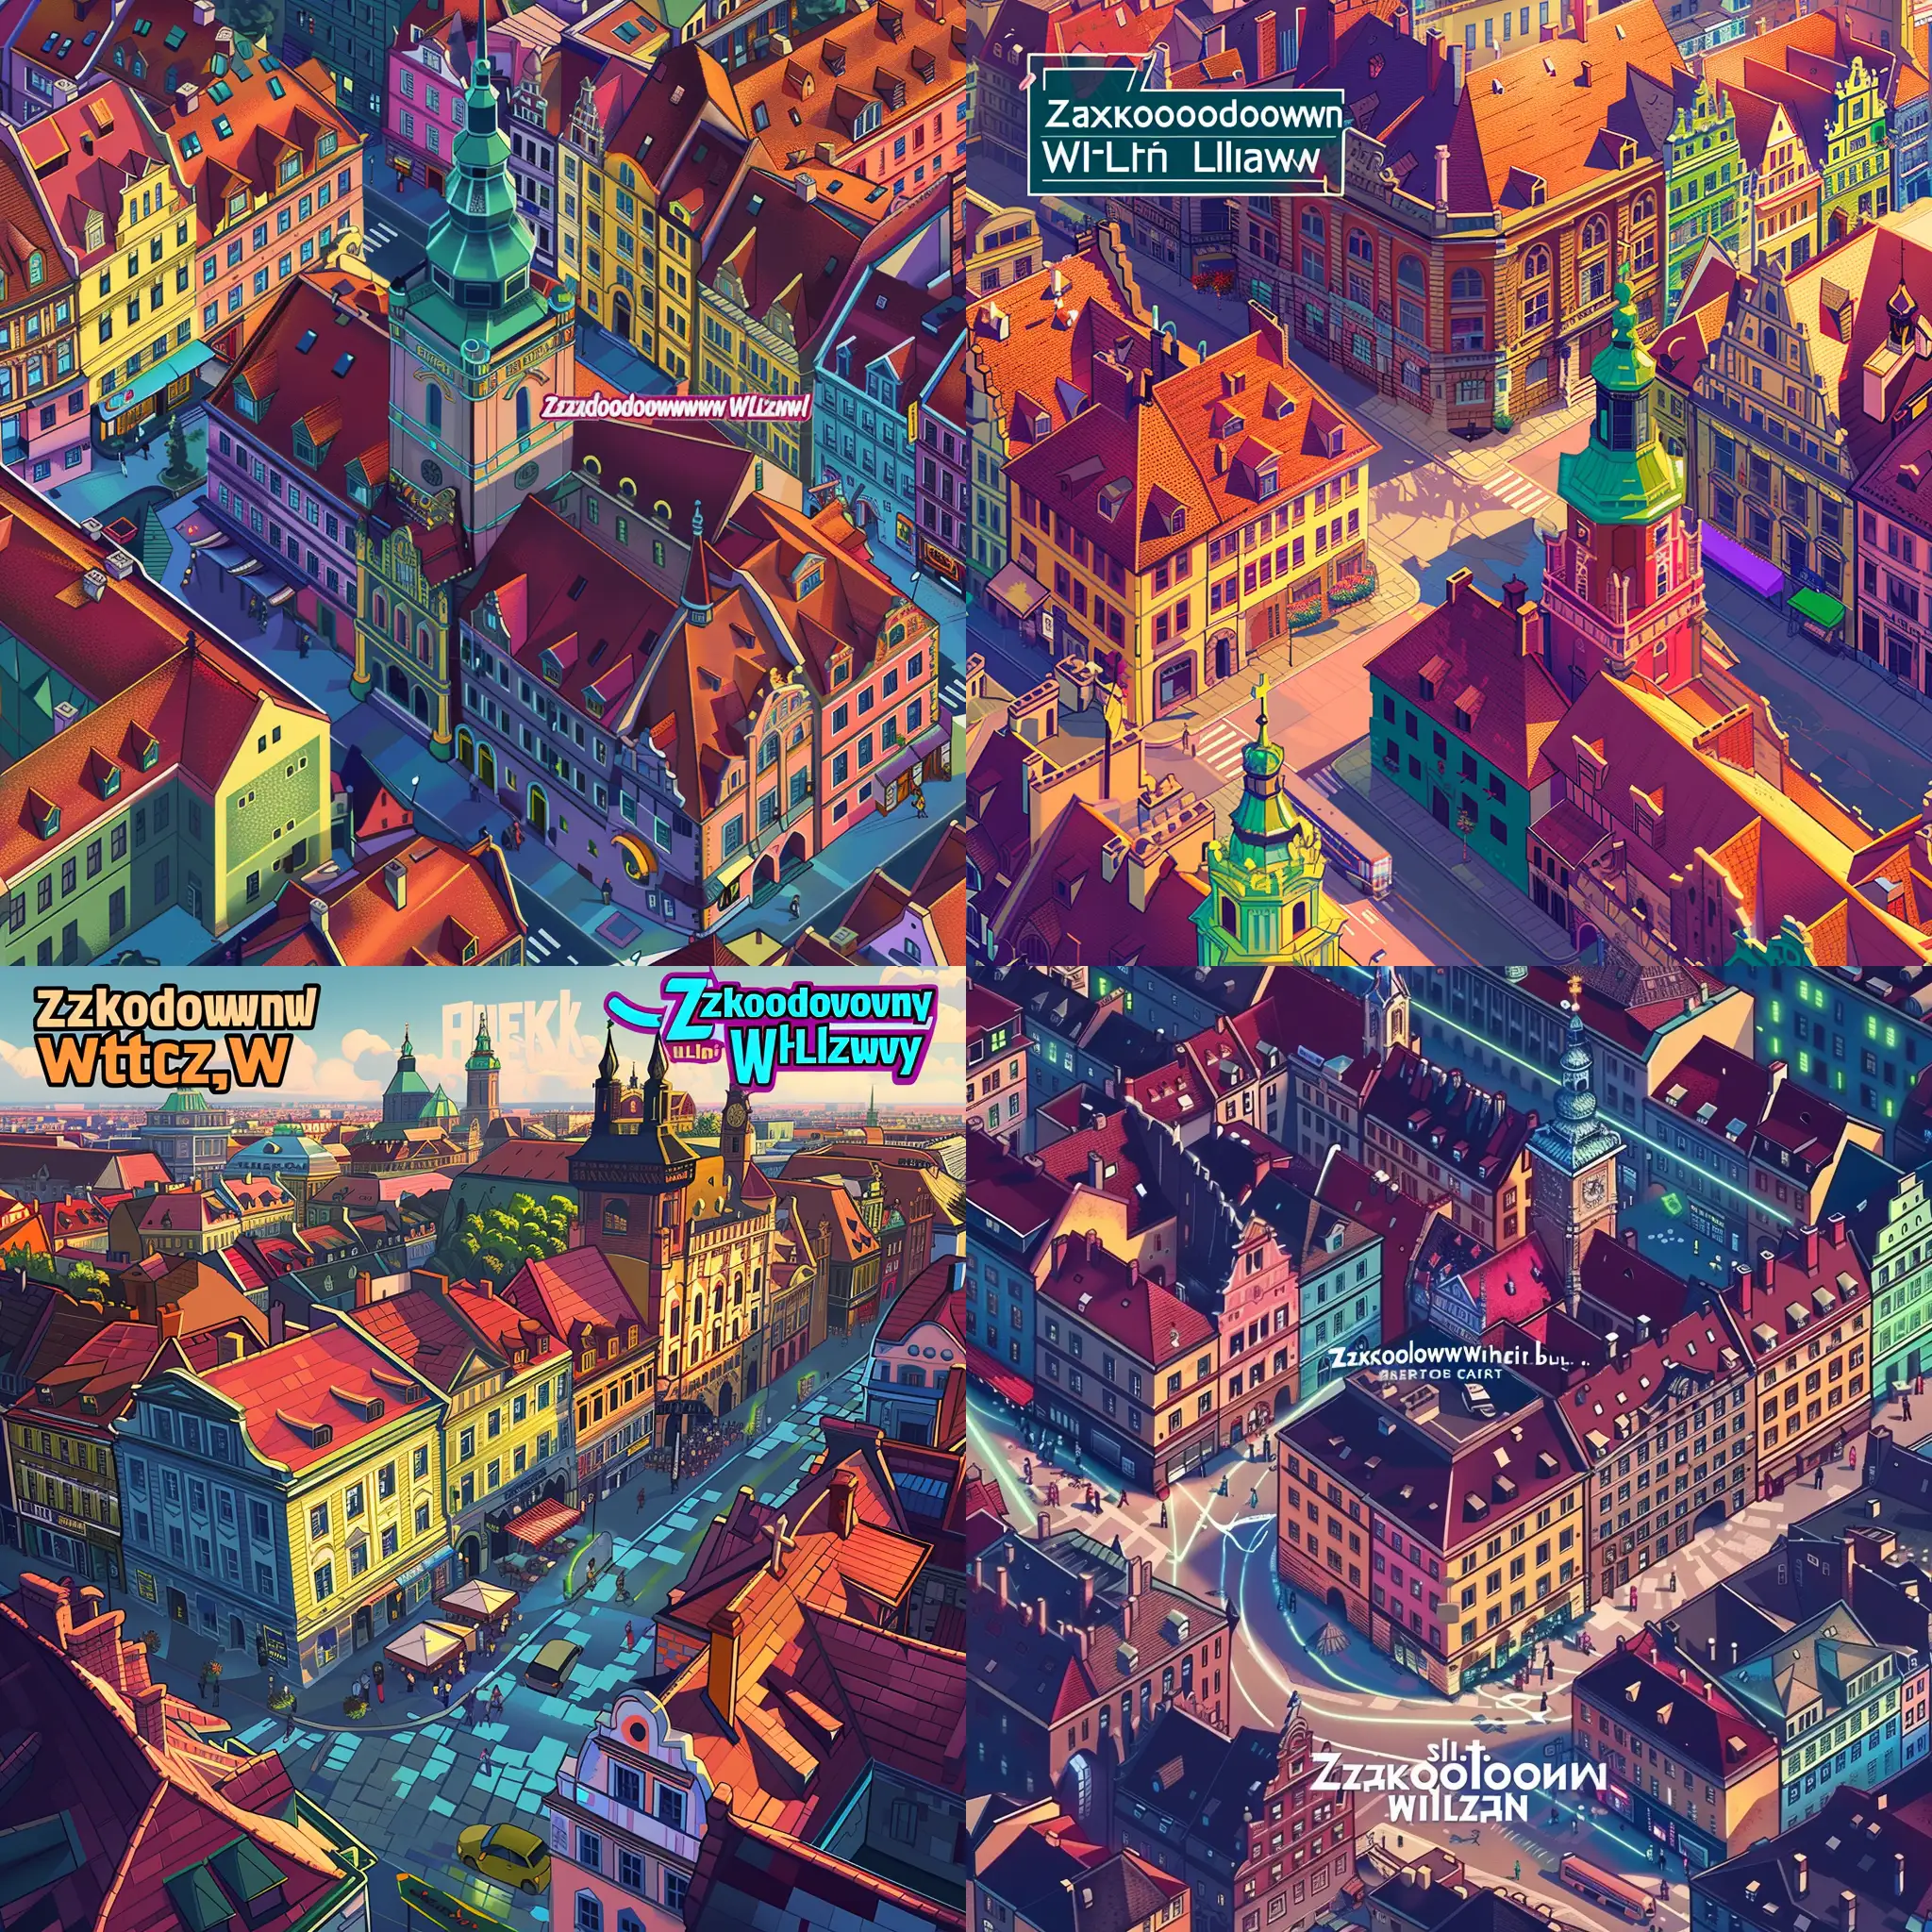 Create a logo for city game which is ilustraded this way: A vibrant and futuristic illustration of Wrocław's Old Town, showcasing the excitement and mystery of the urban game "Zakodowany Wrocław". The scene should prominently feature iconic landmarks such as the Rynek (Market Square) with the Old Town Hall, St. Elizabeth's Church, and the colorful townhouses.